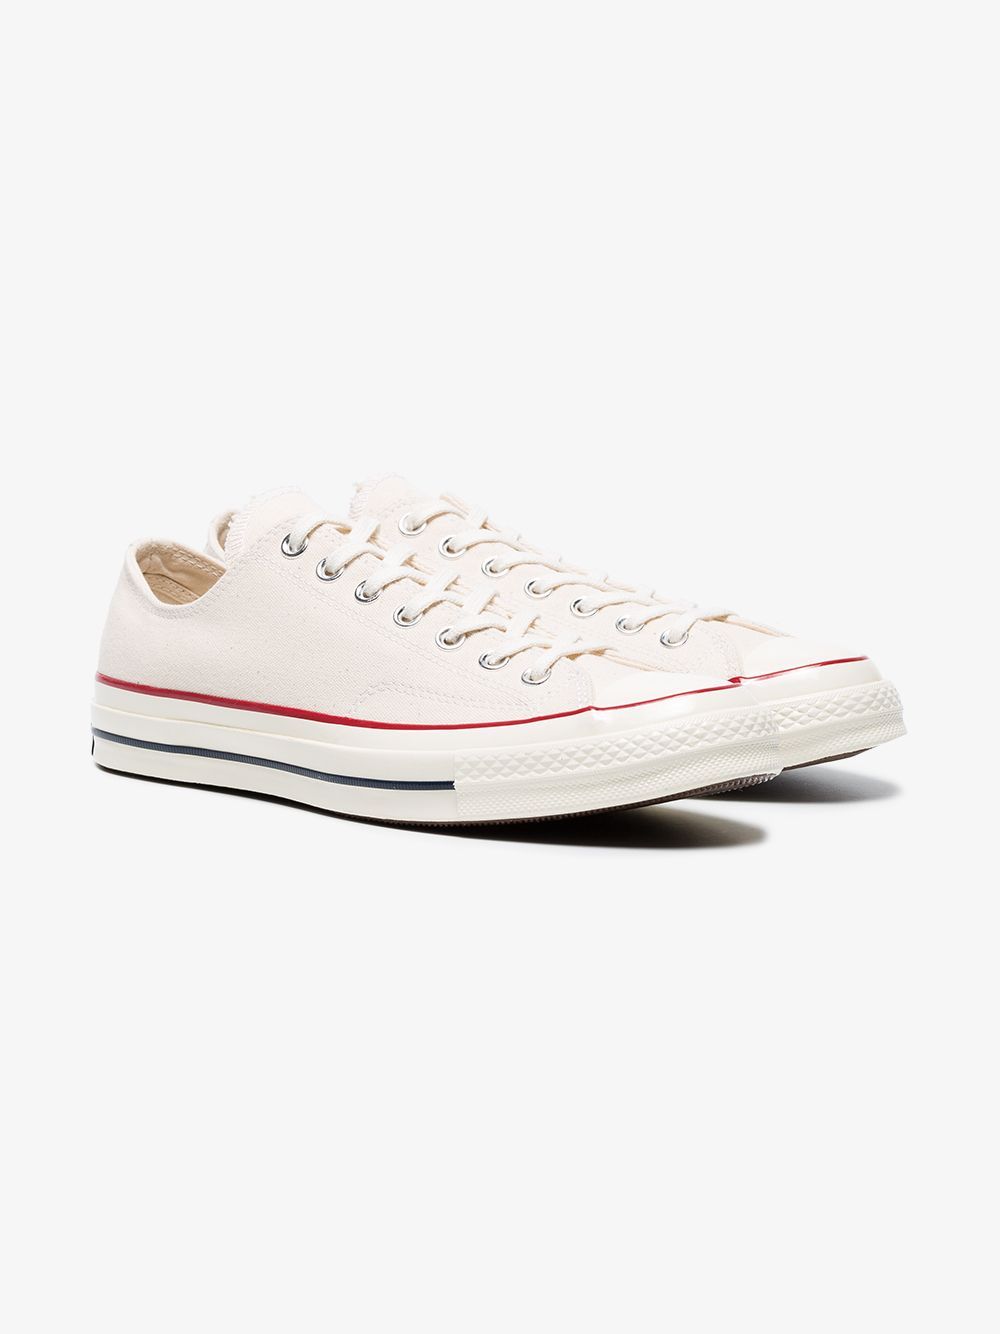 Converse Chuck Taylor All Star 70 Vintage canvas sneakers | Browns Fashion